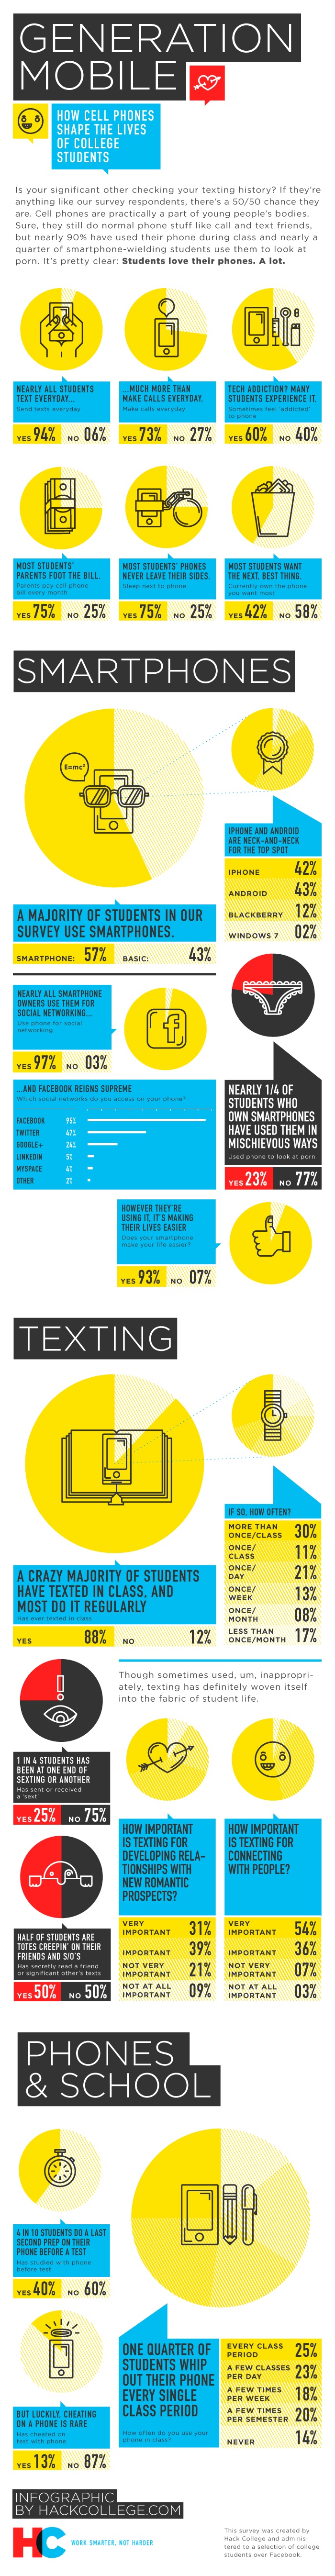 How Student Use Smartphones Infographic